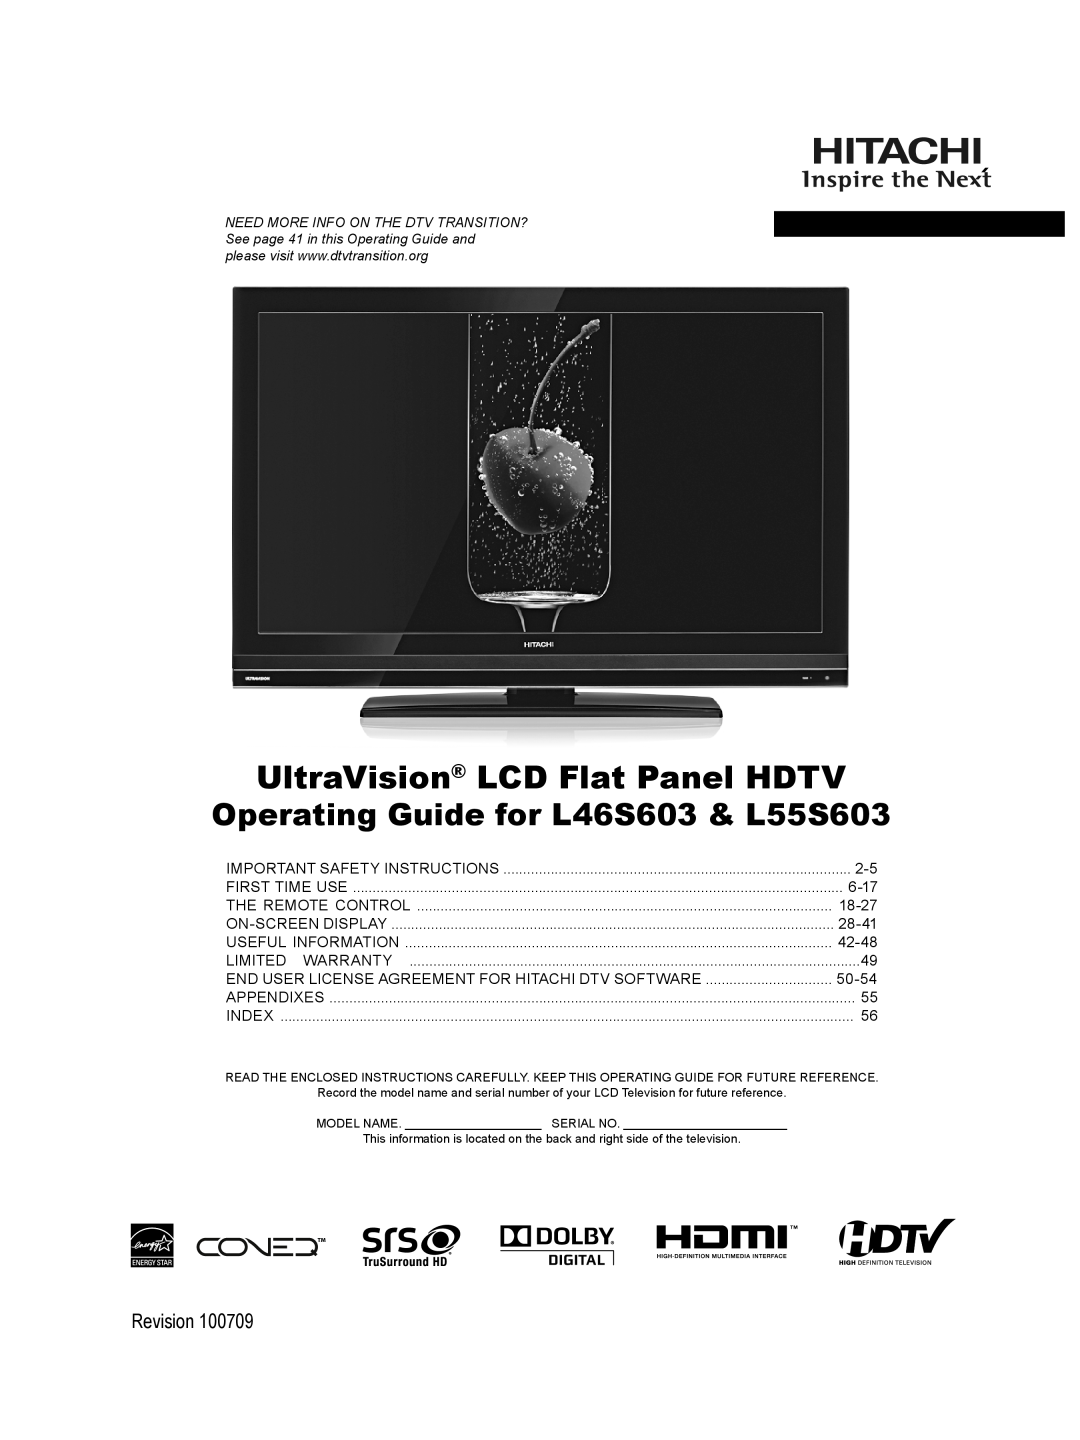 Hitachi important safety instructions UltraVision LCD Flat Panel HDTV, Operating Guide for L46S603 & L55S603, Revision 